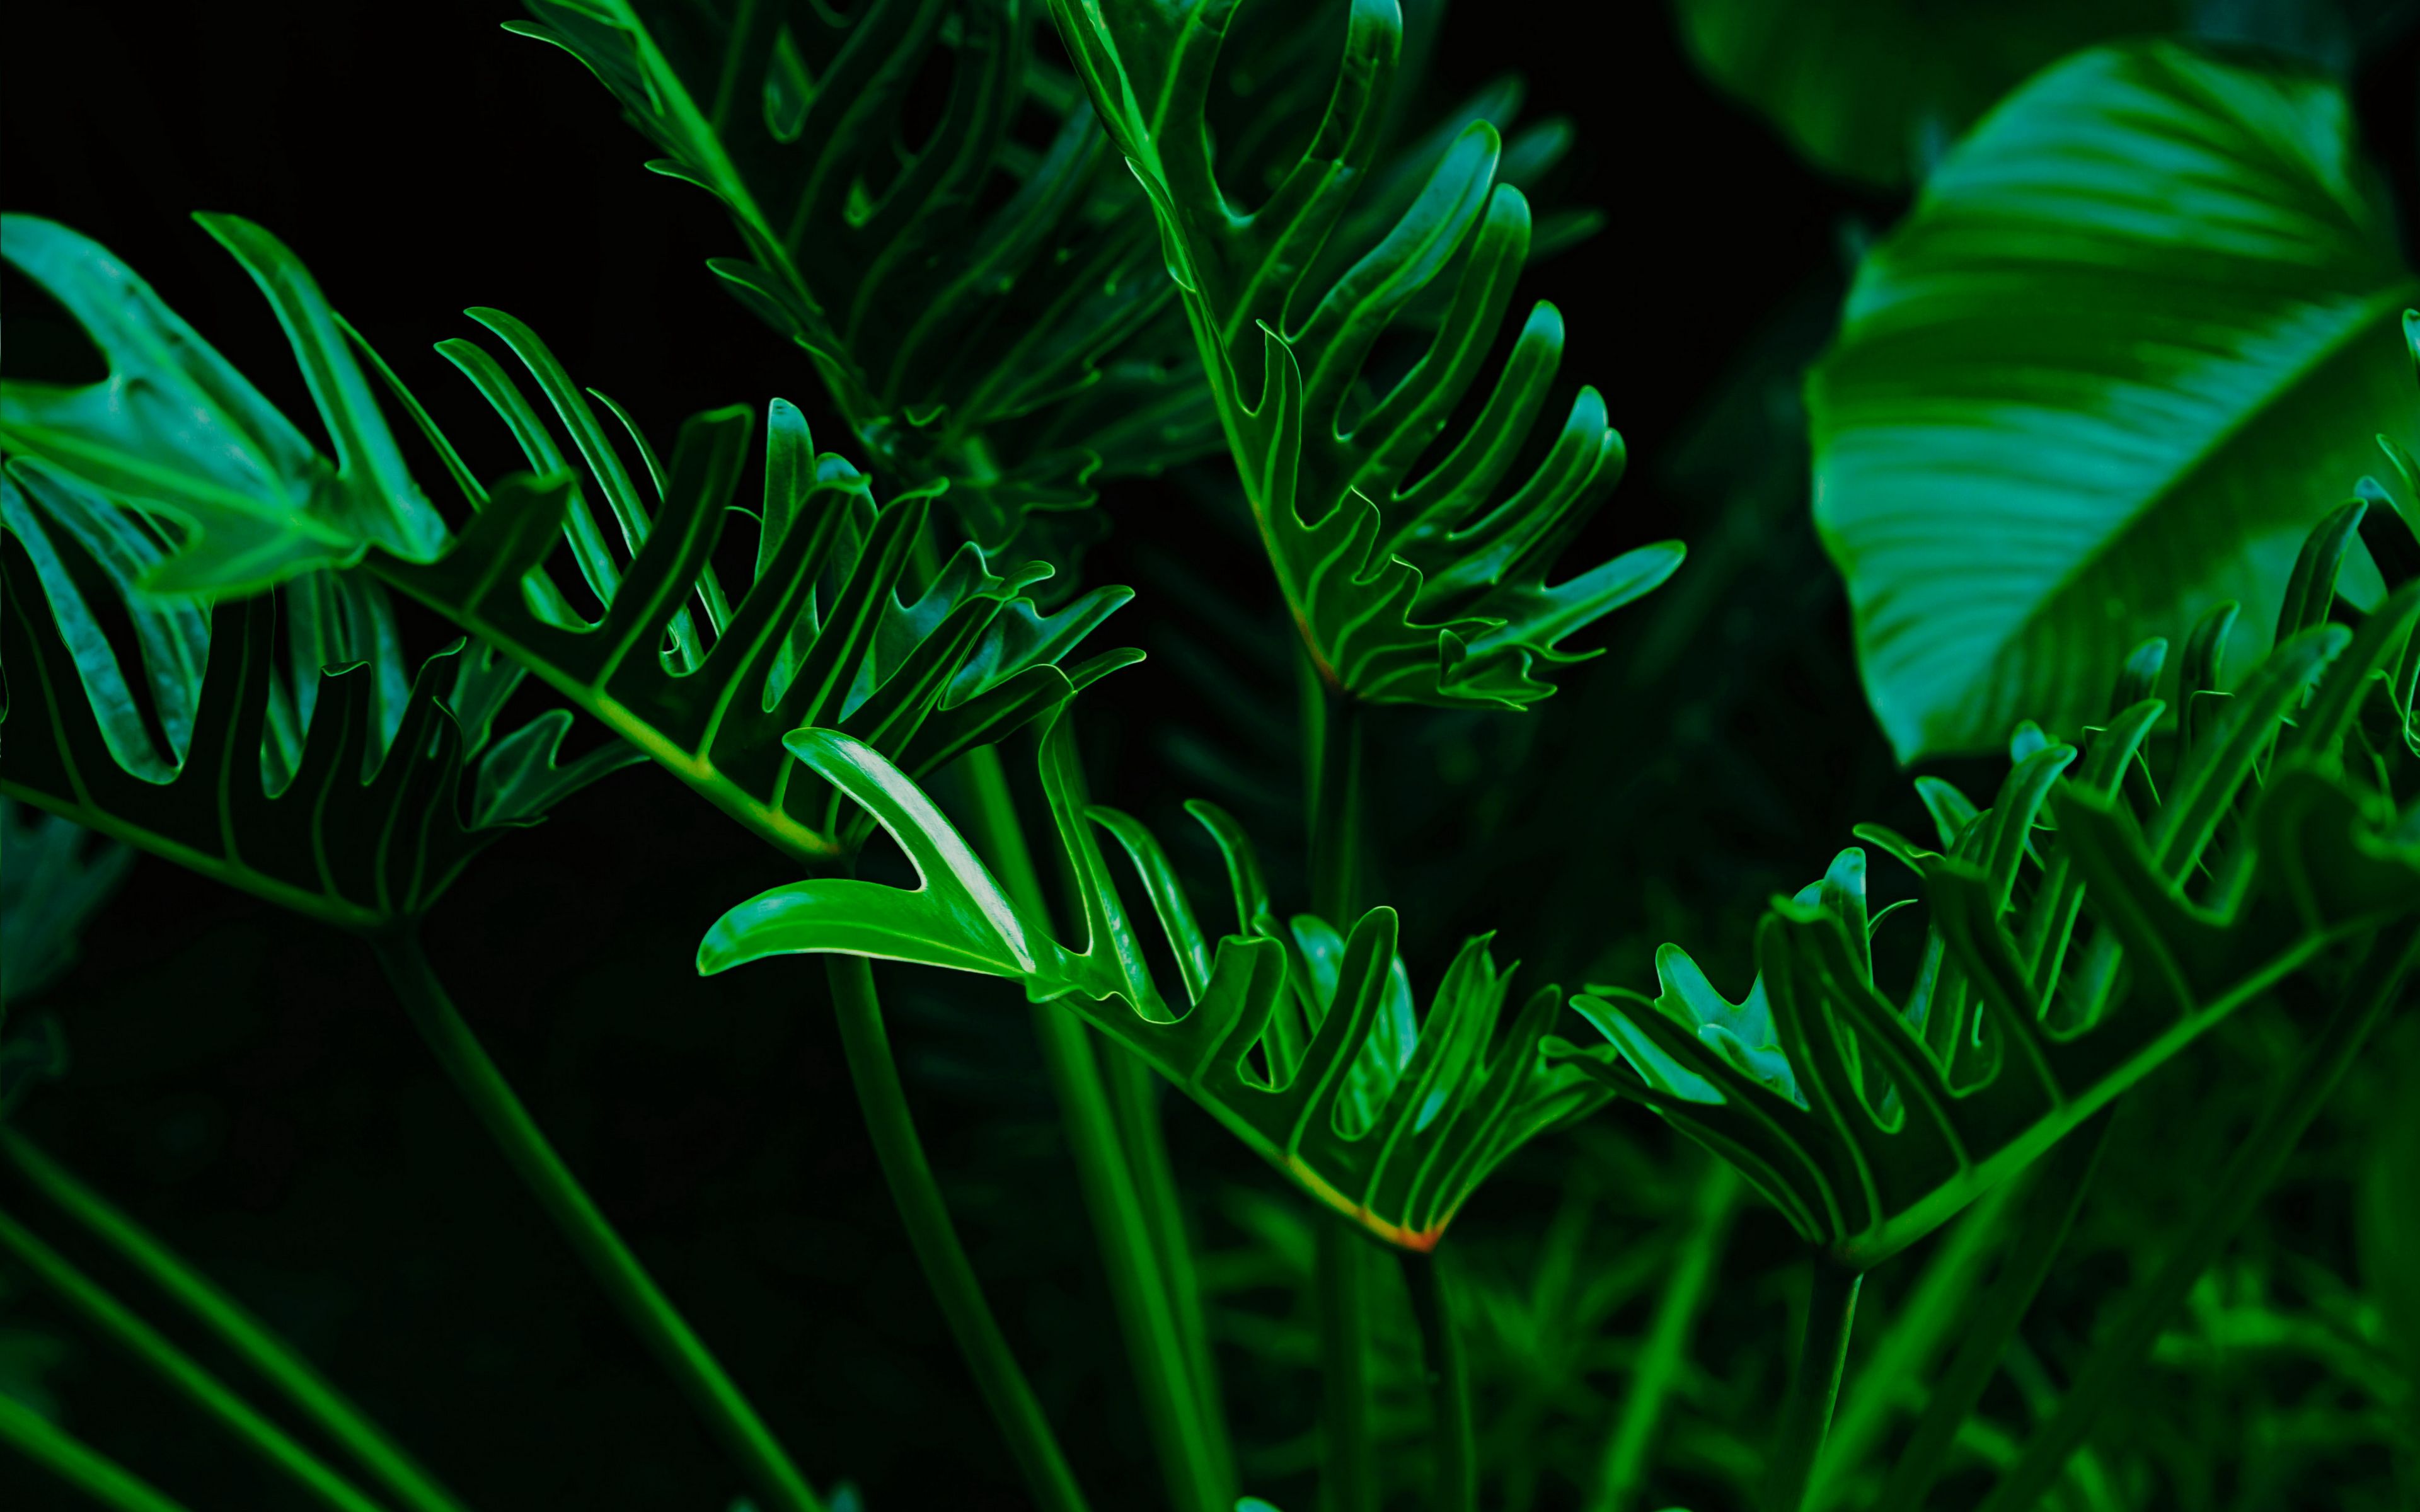 Download wallpaper 3840x2400 plant, leaves, green, exotic 4k ultra hd